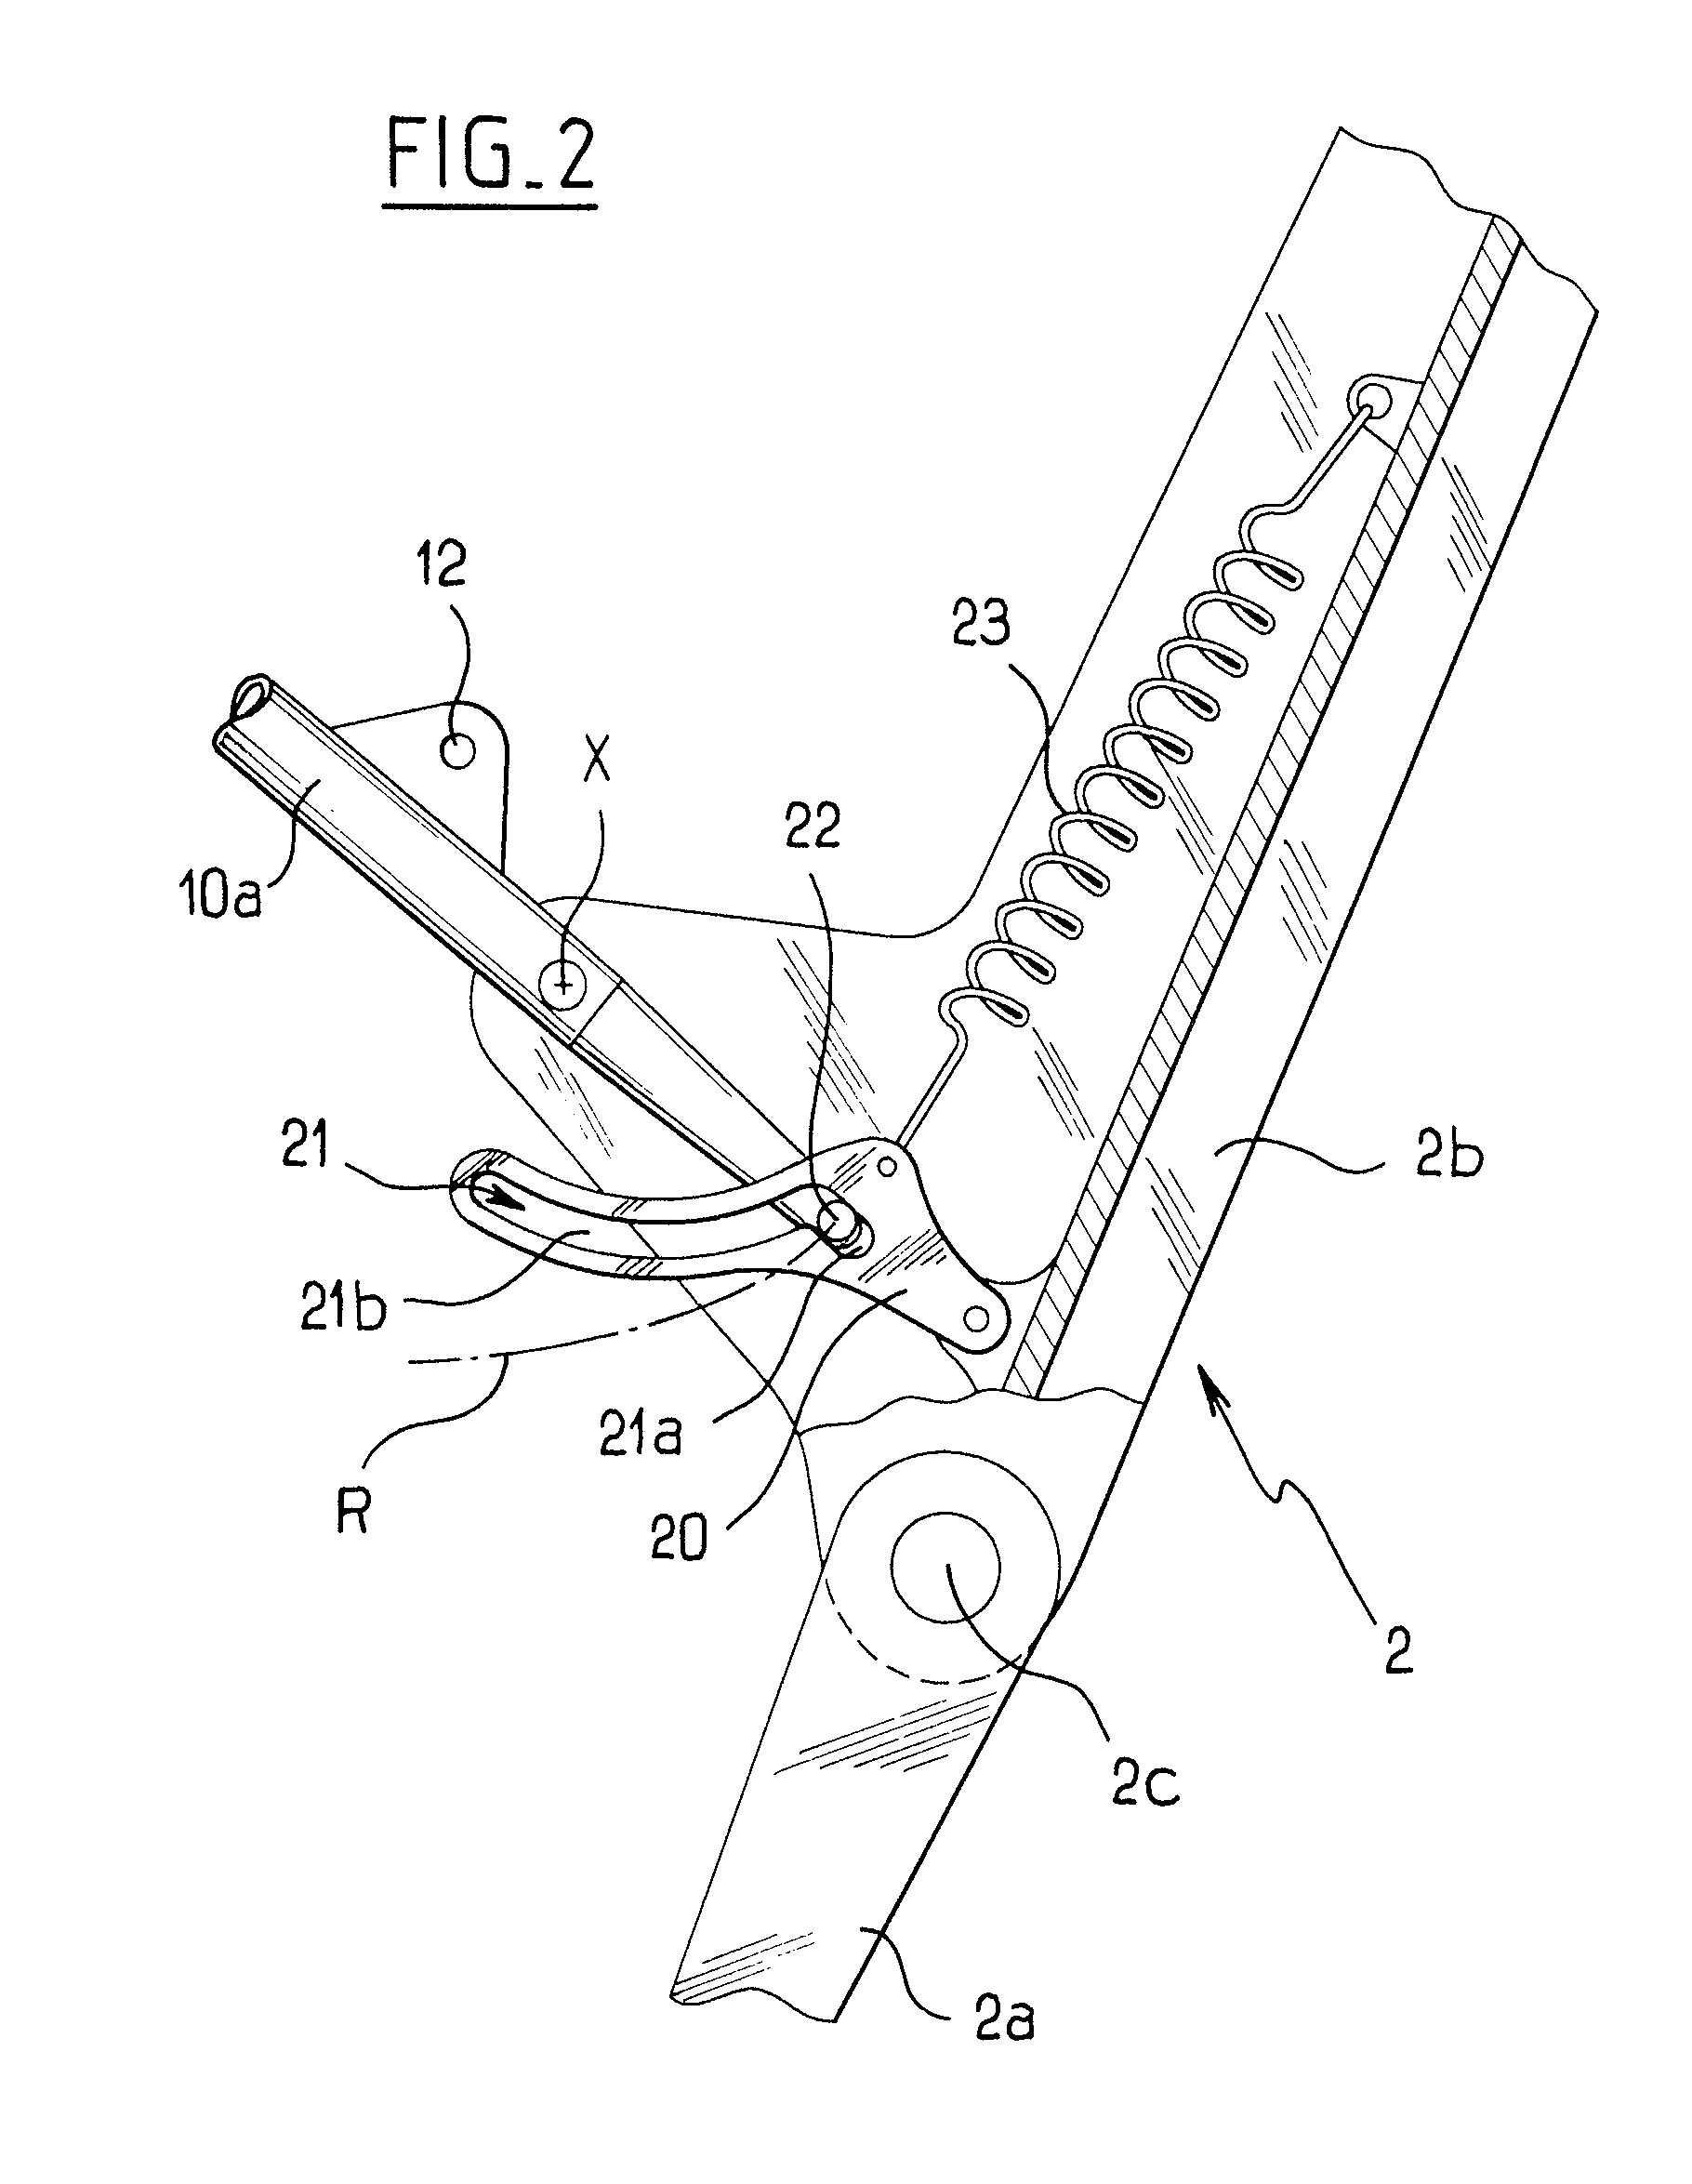 Brace-locking device for an aircraft undercarriage